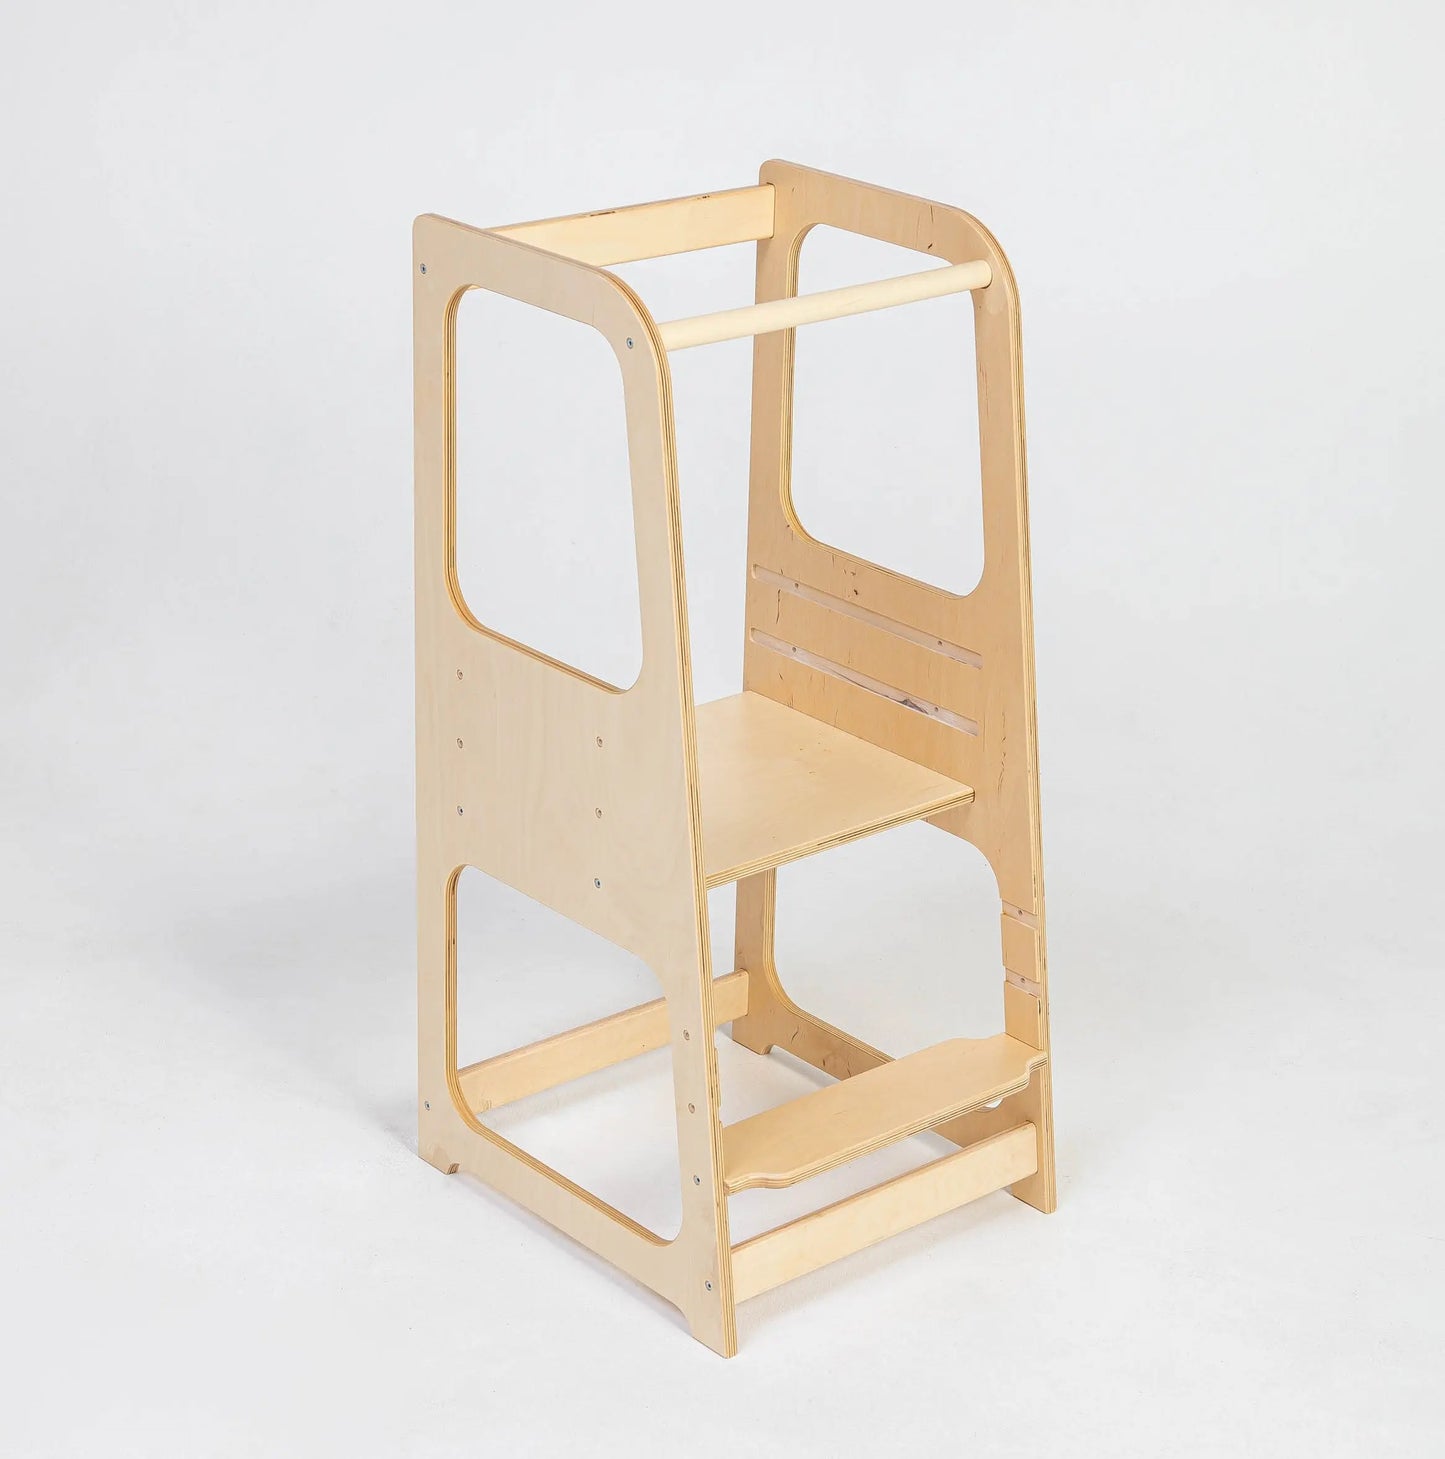 A Montessori Learning Tower Step Stool for Kids - 2-in-1 design, crafted from sturdy wood, with adjustable height levels for safe kitchen exploration.